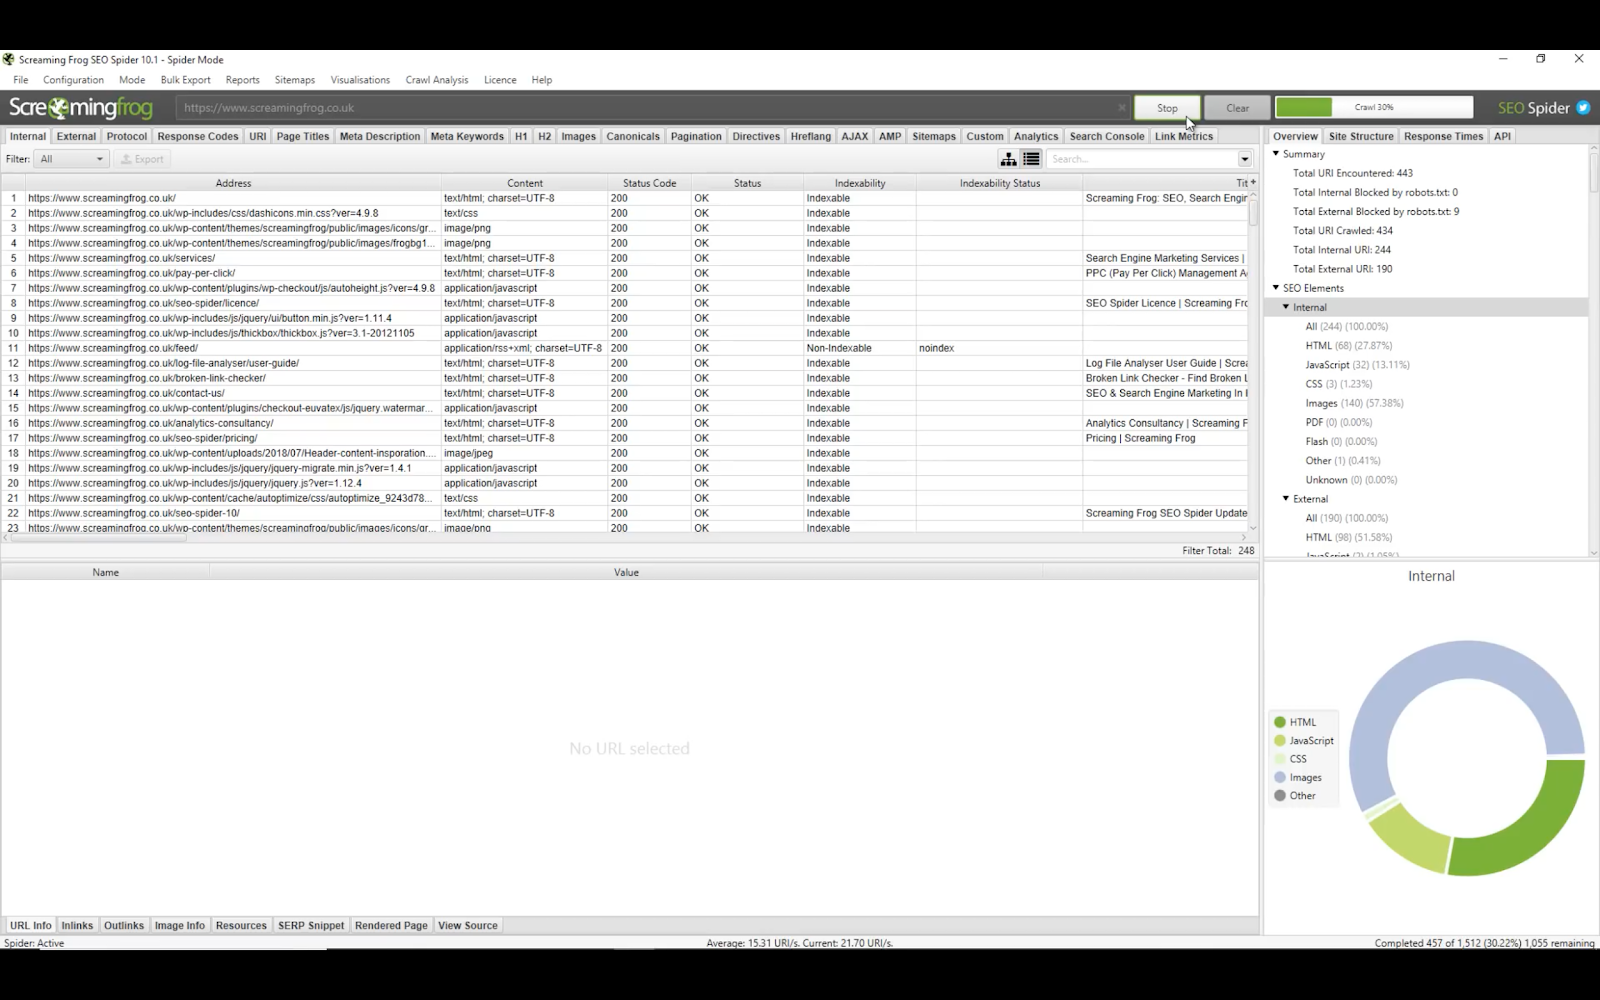 Image of spreadsheet using Screaming Frog for content inventory.